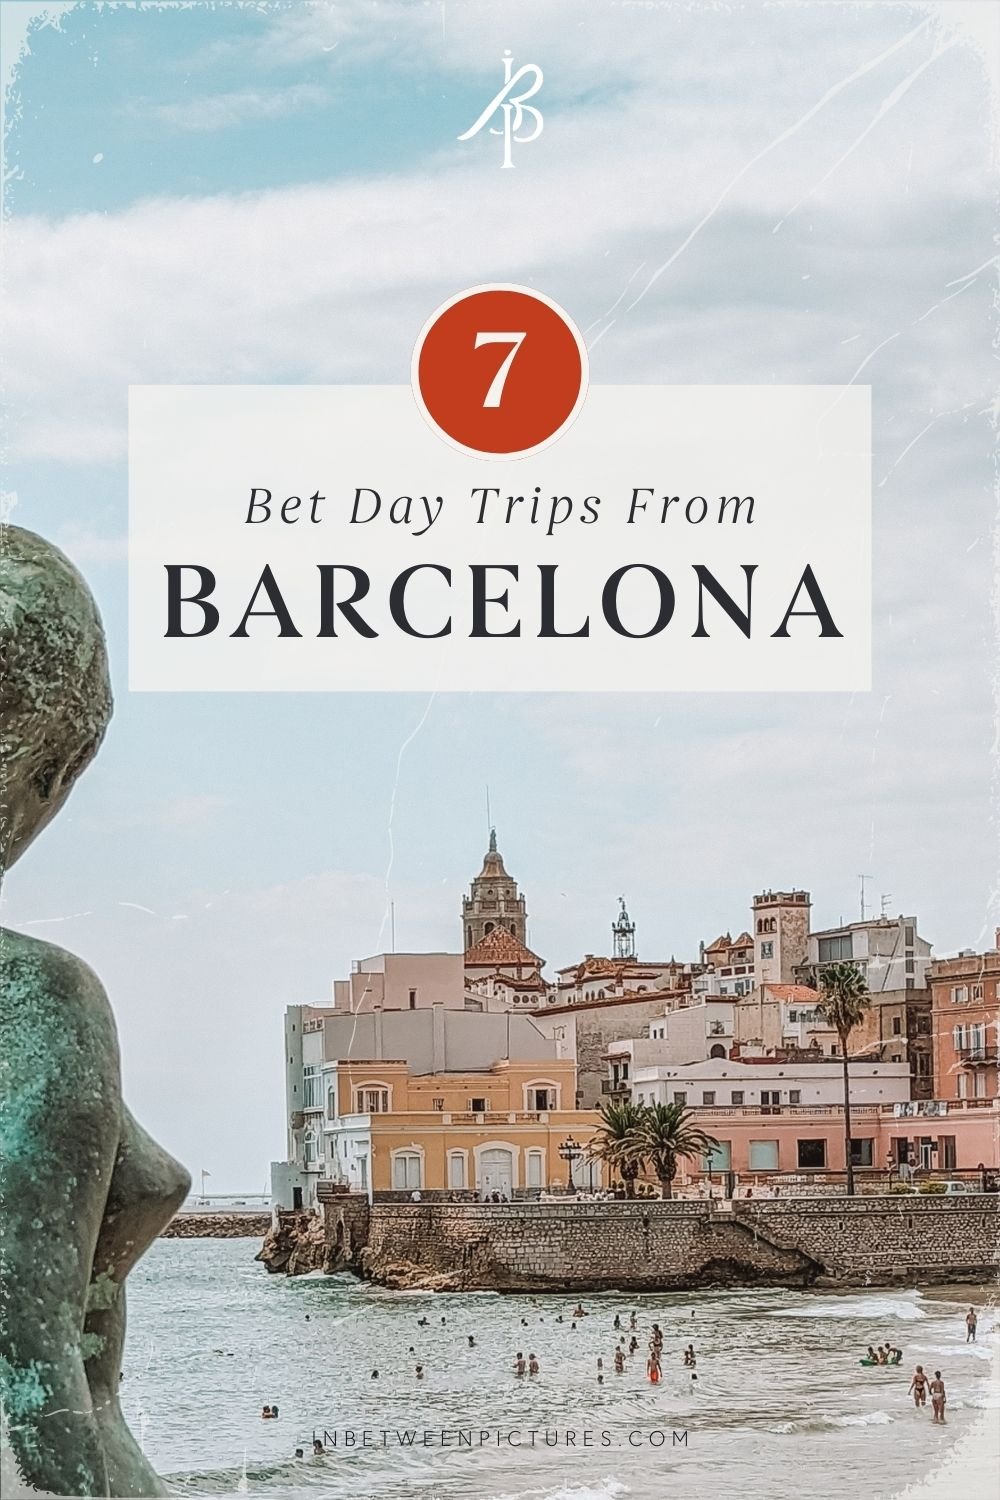 The 7 Best Day Trips From Barcelona By Train